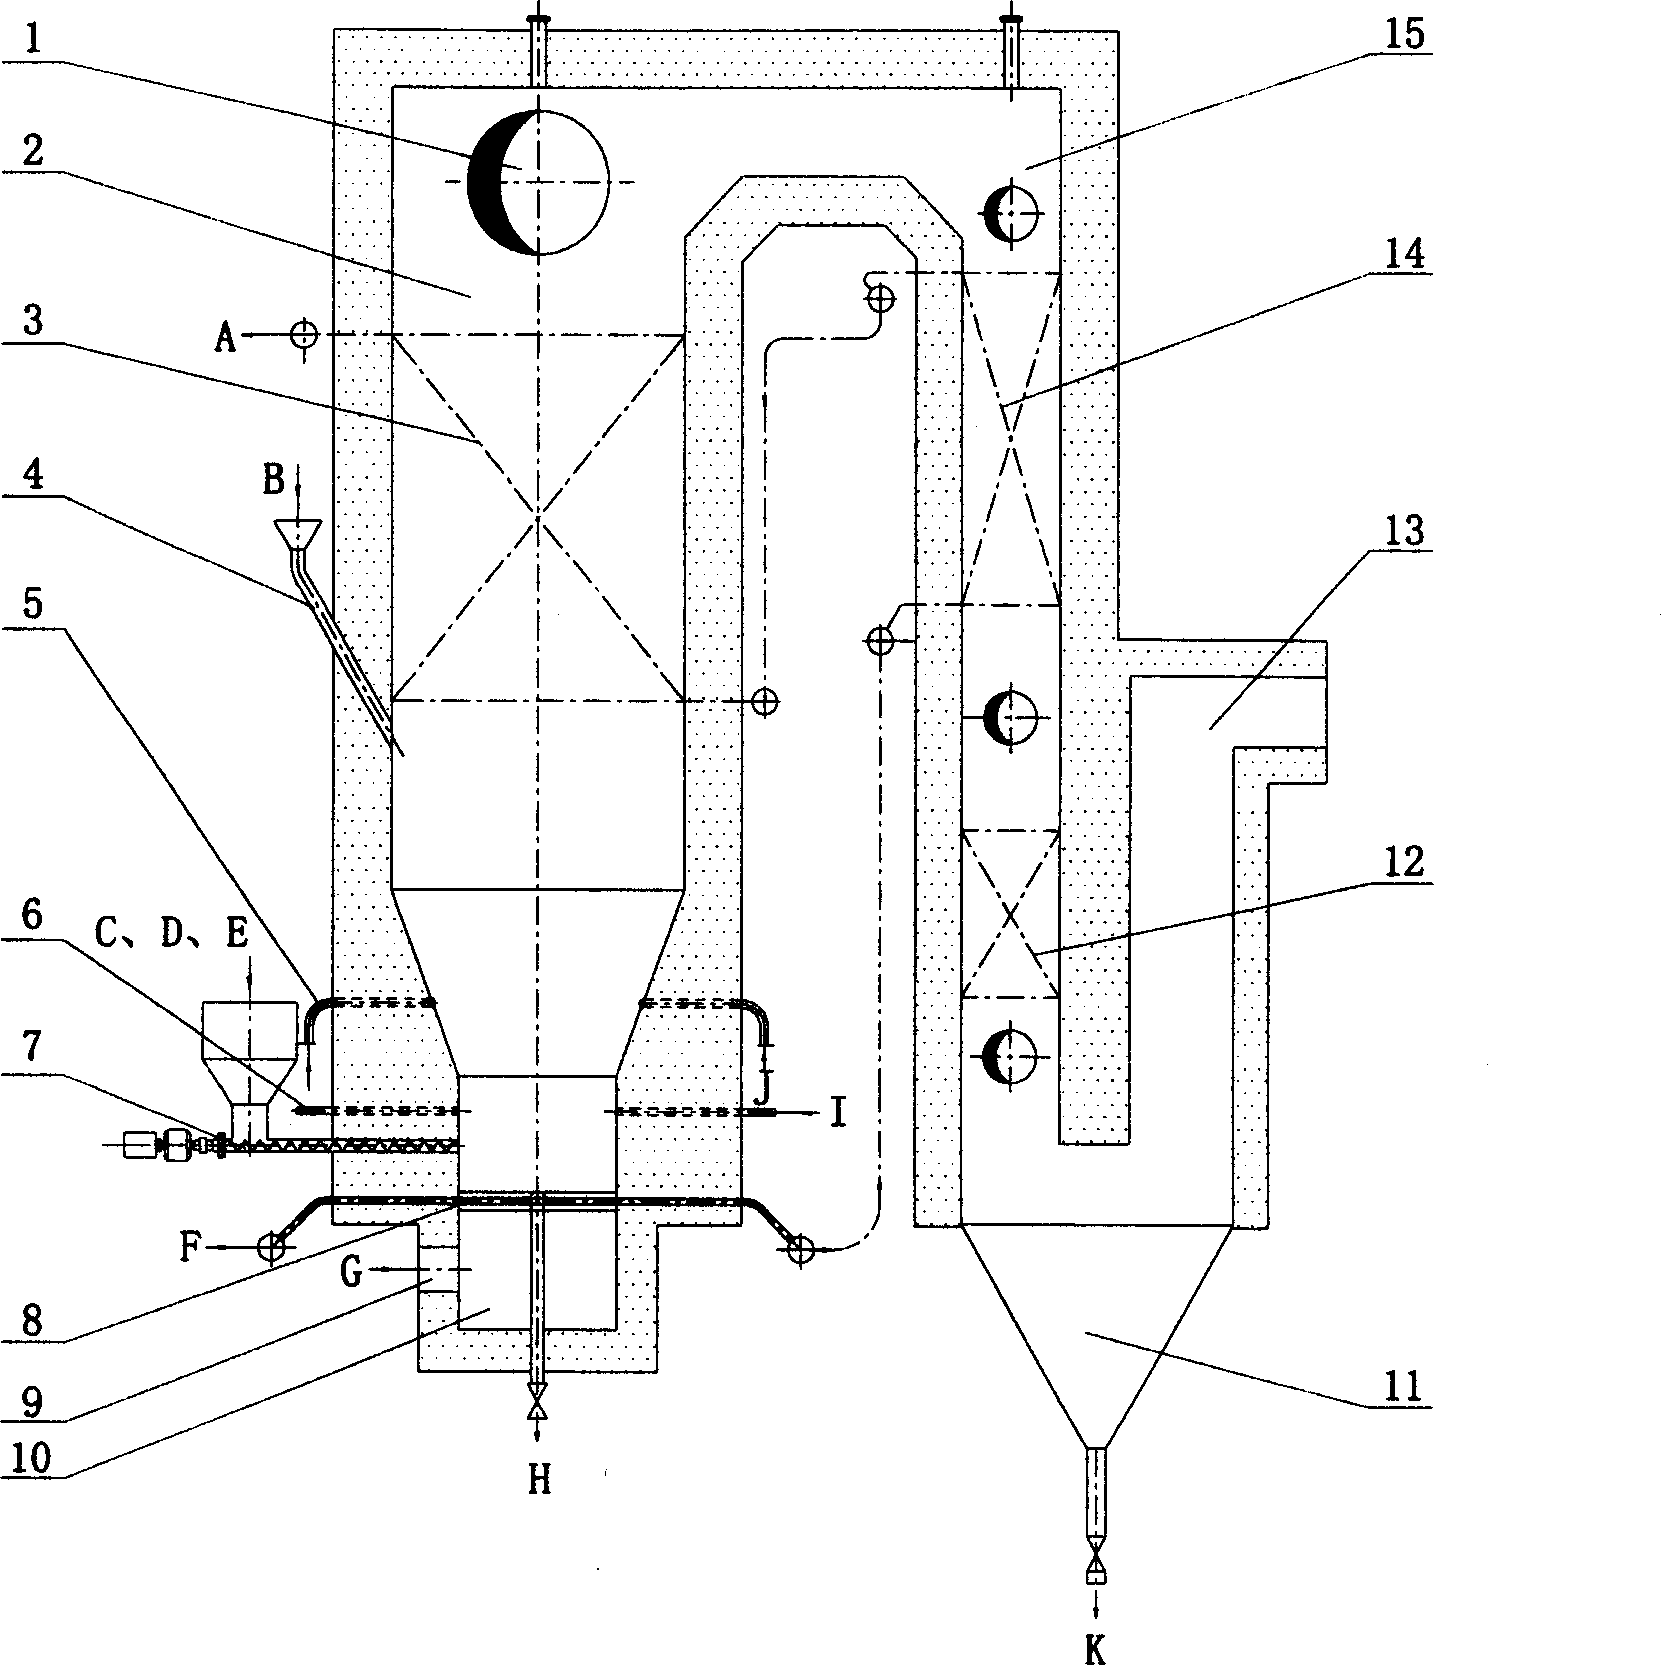 City sludge fluidized bed combustion device and method